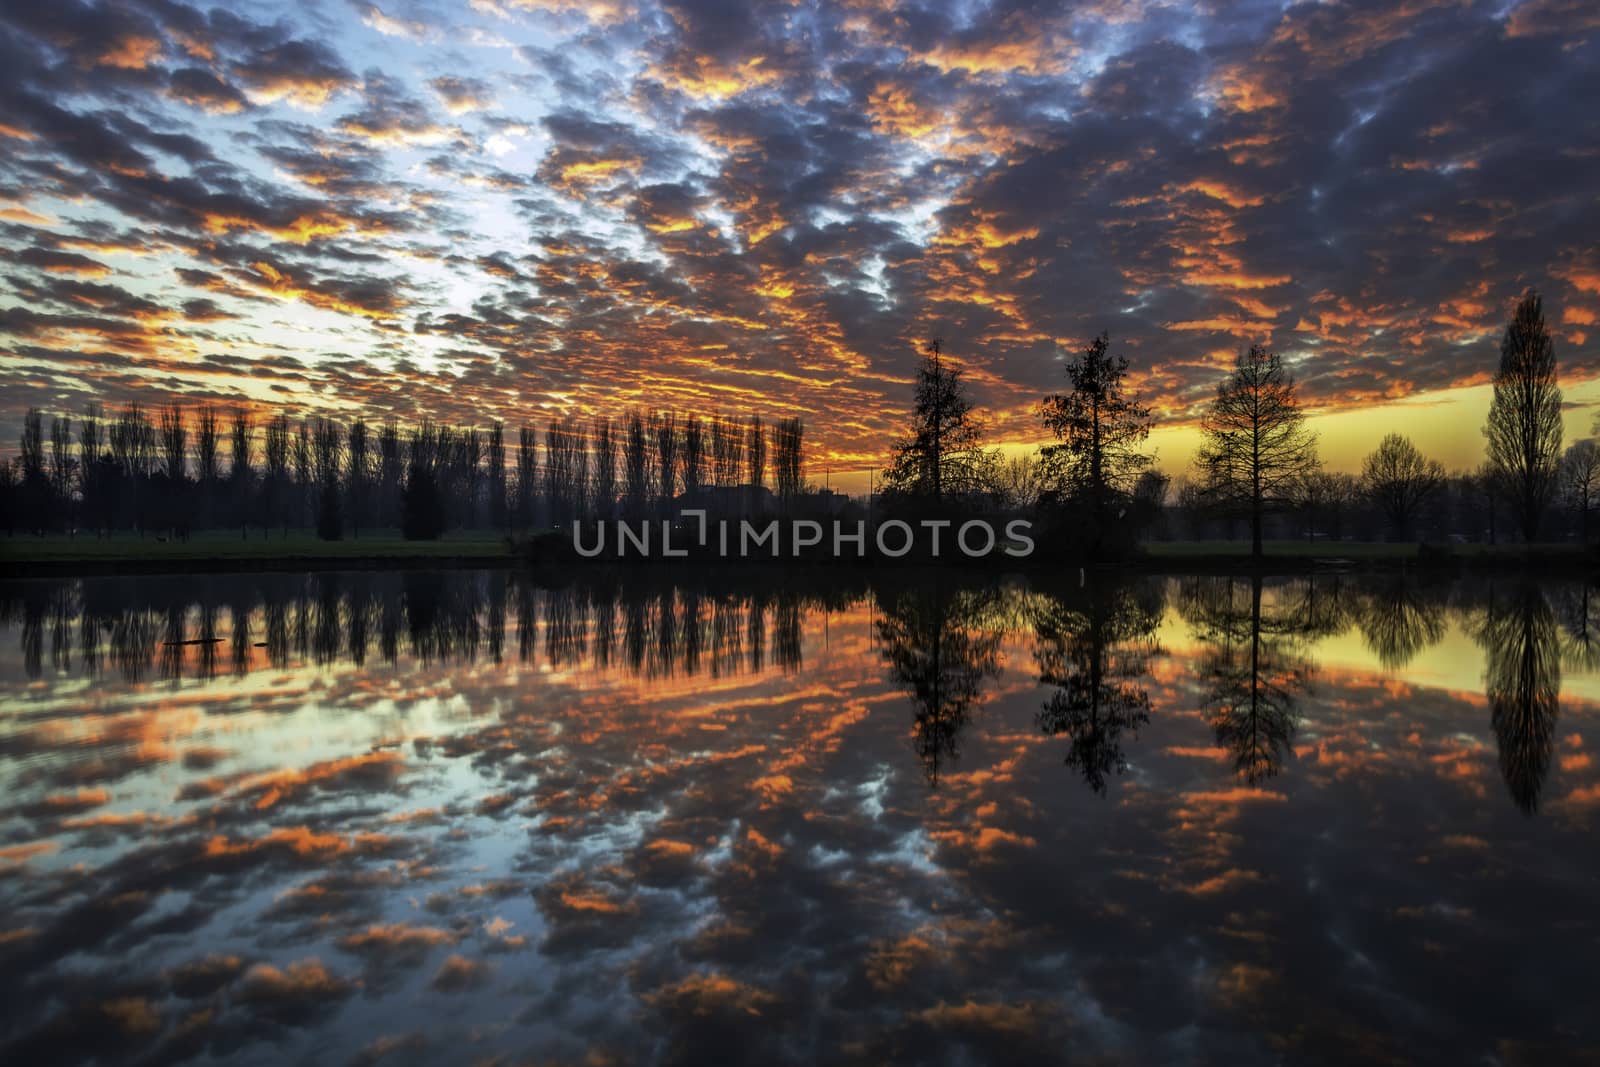 Winter sunset in the shore of a lake with clouds reflected in the water